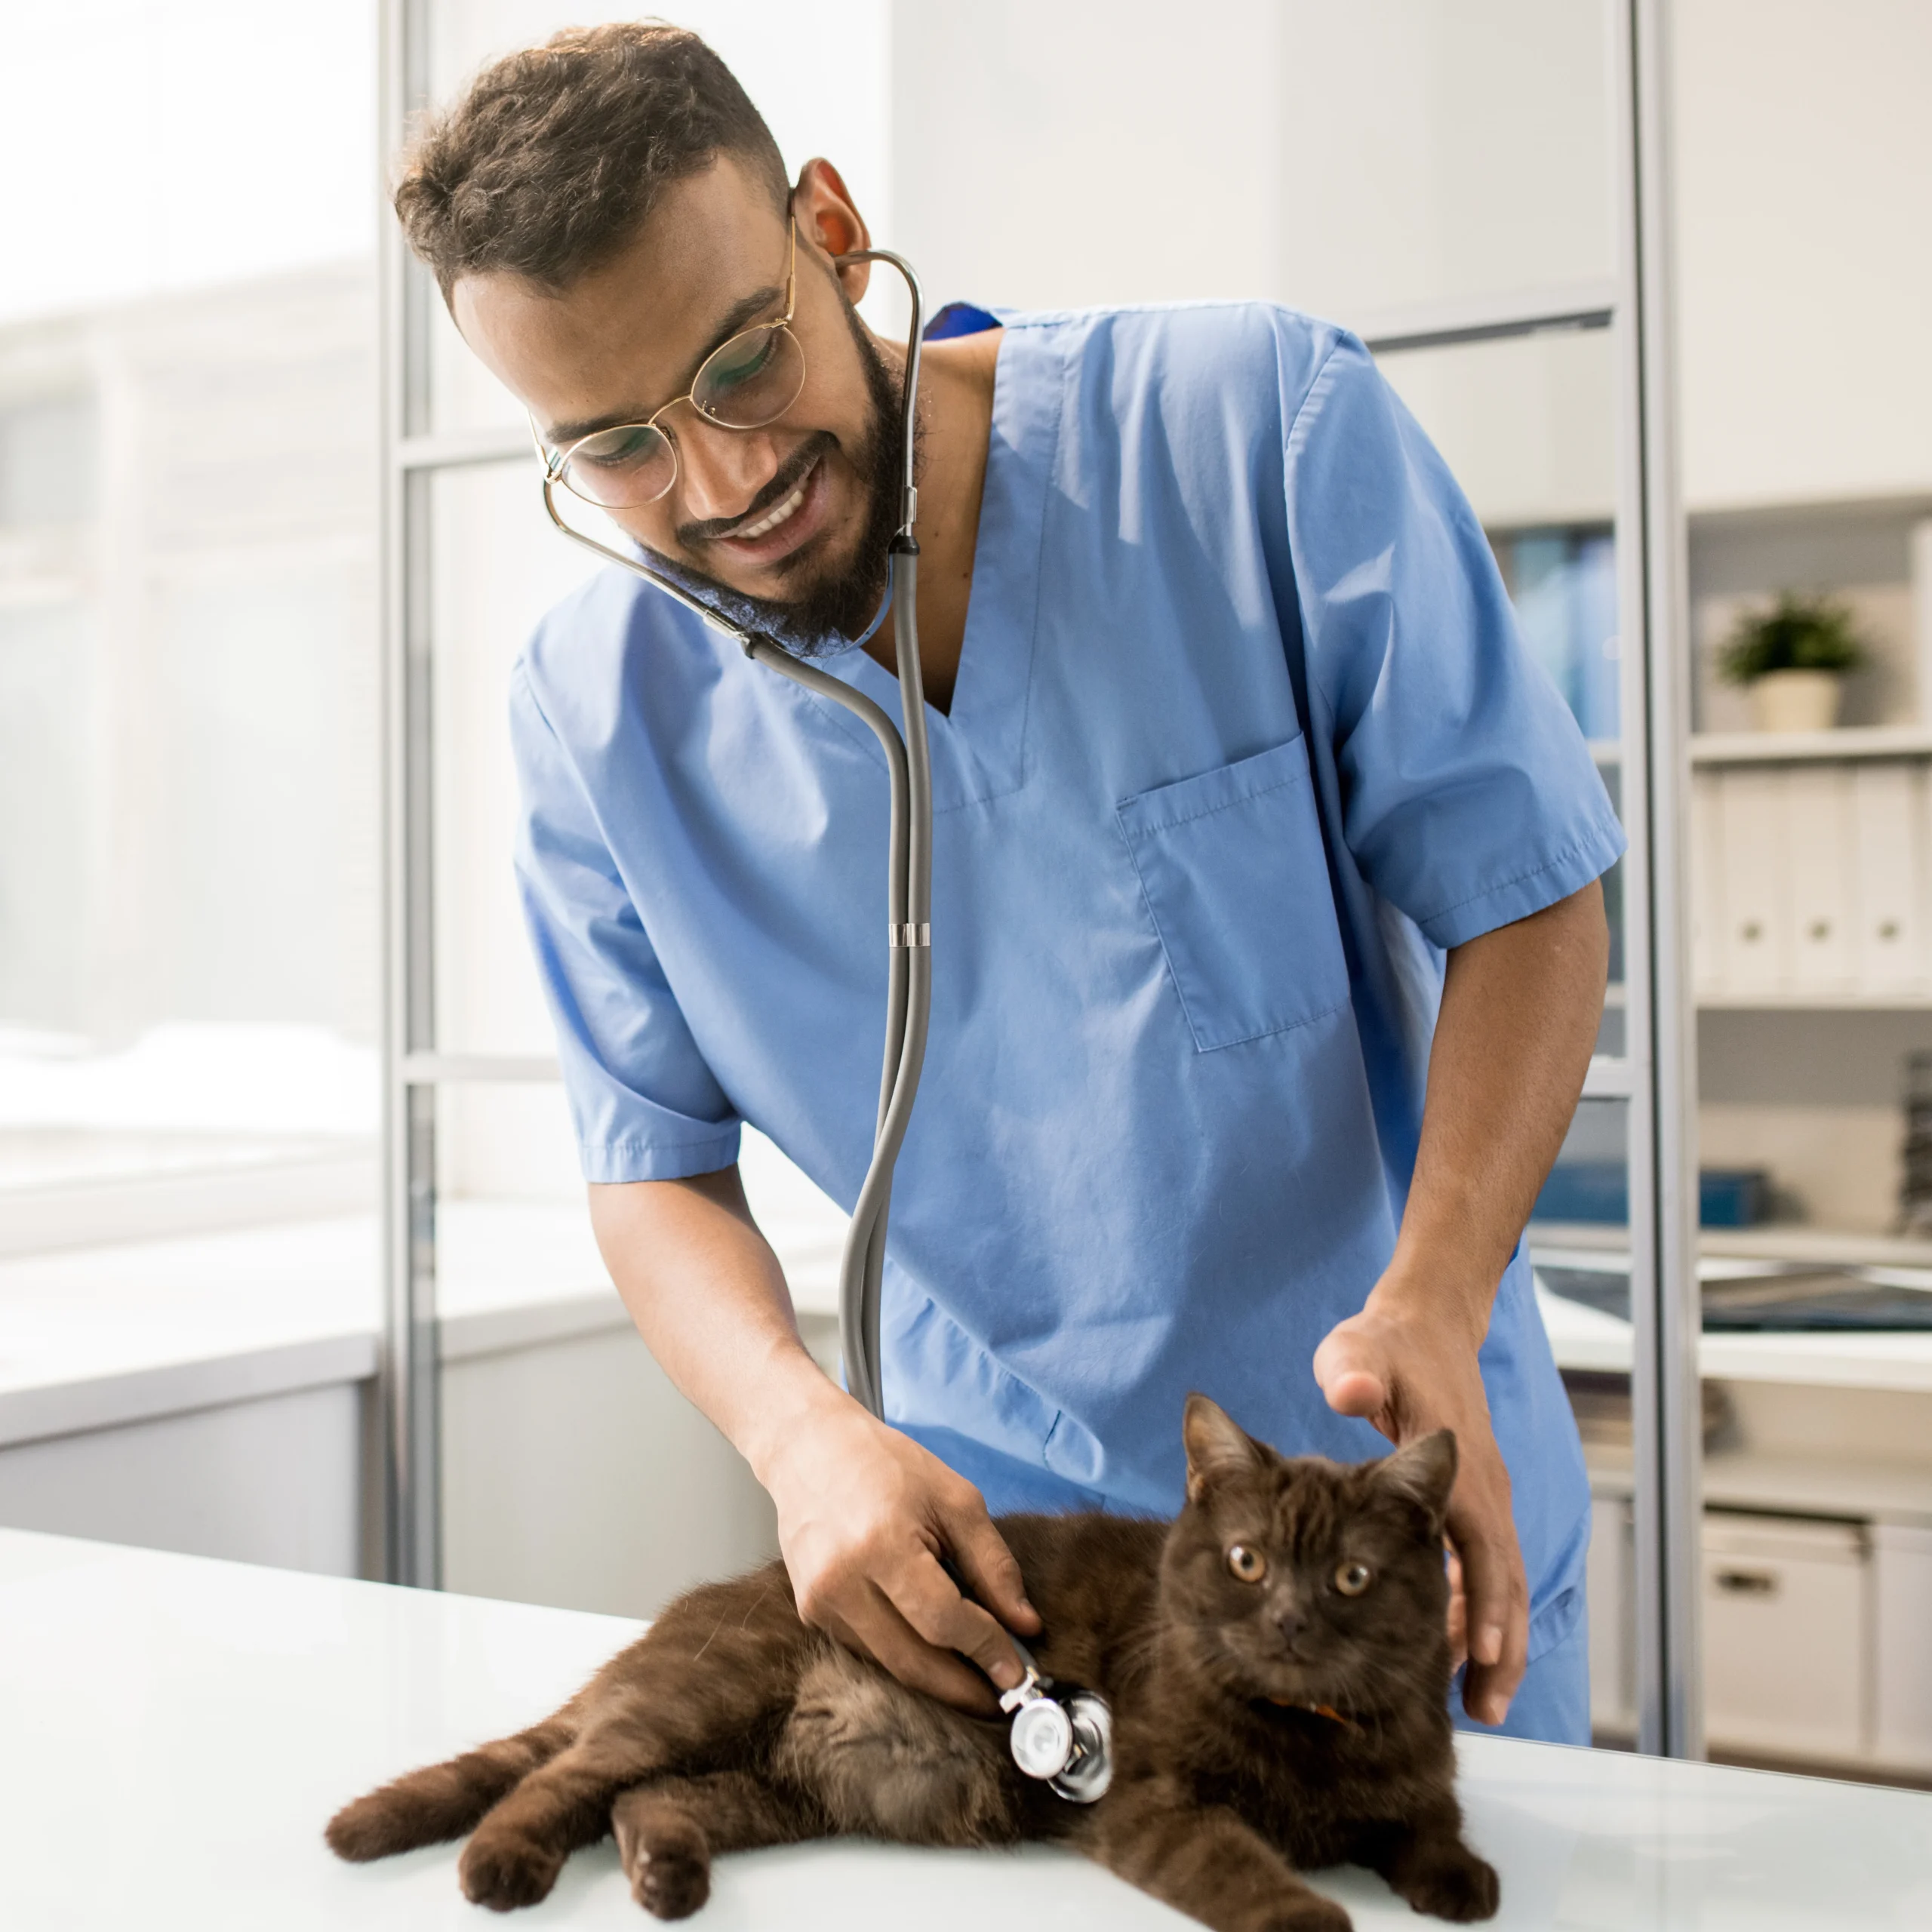 Image of a vet looking at a cat